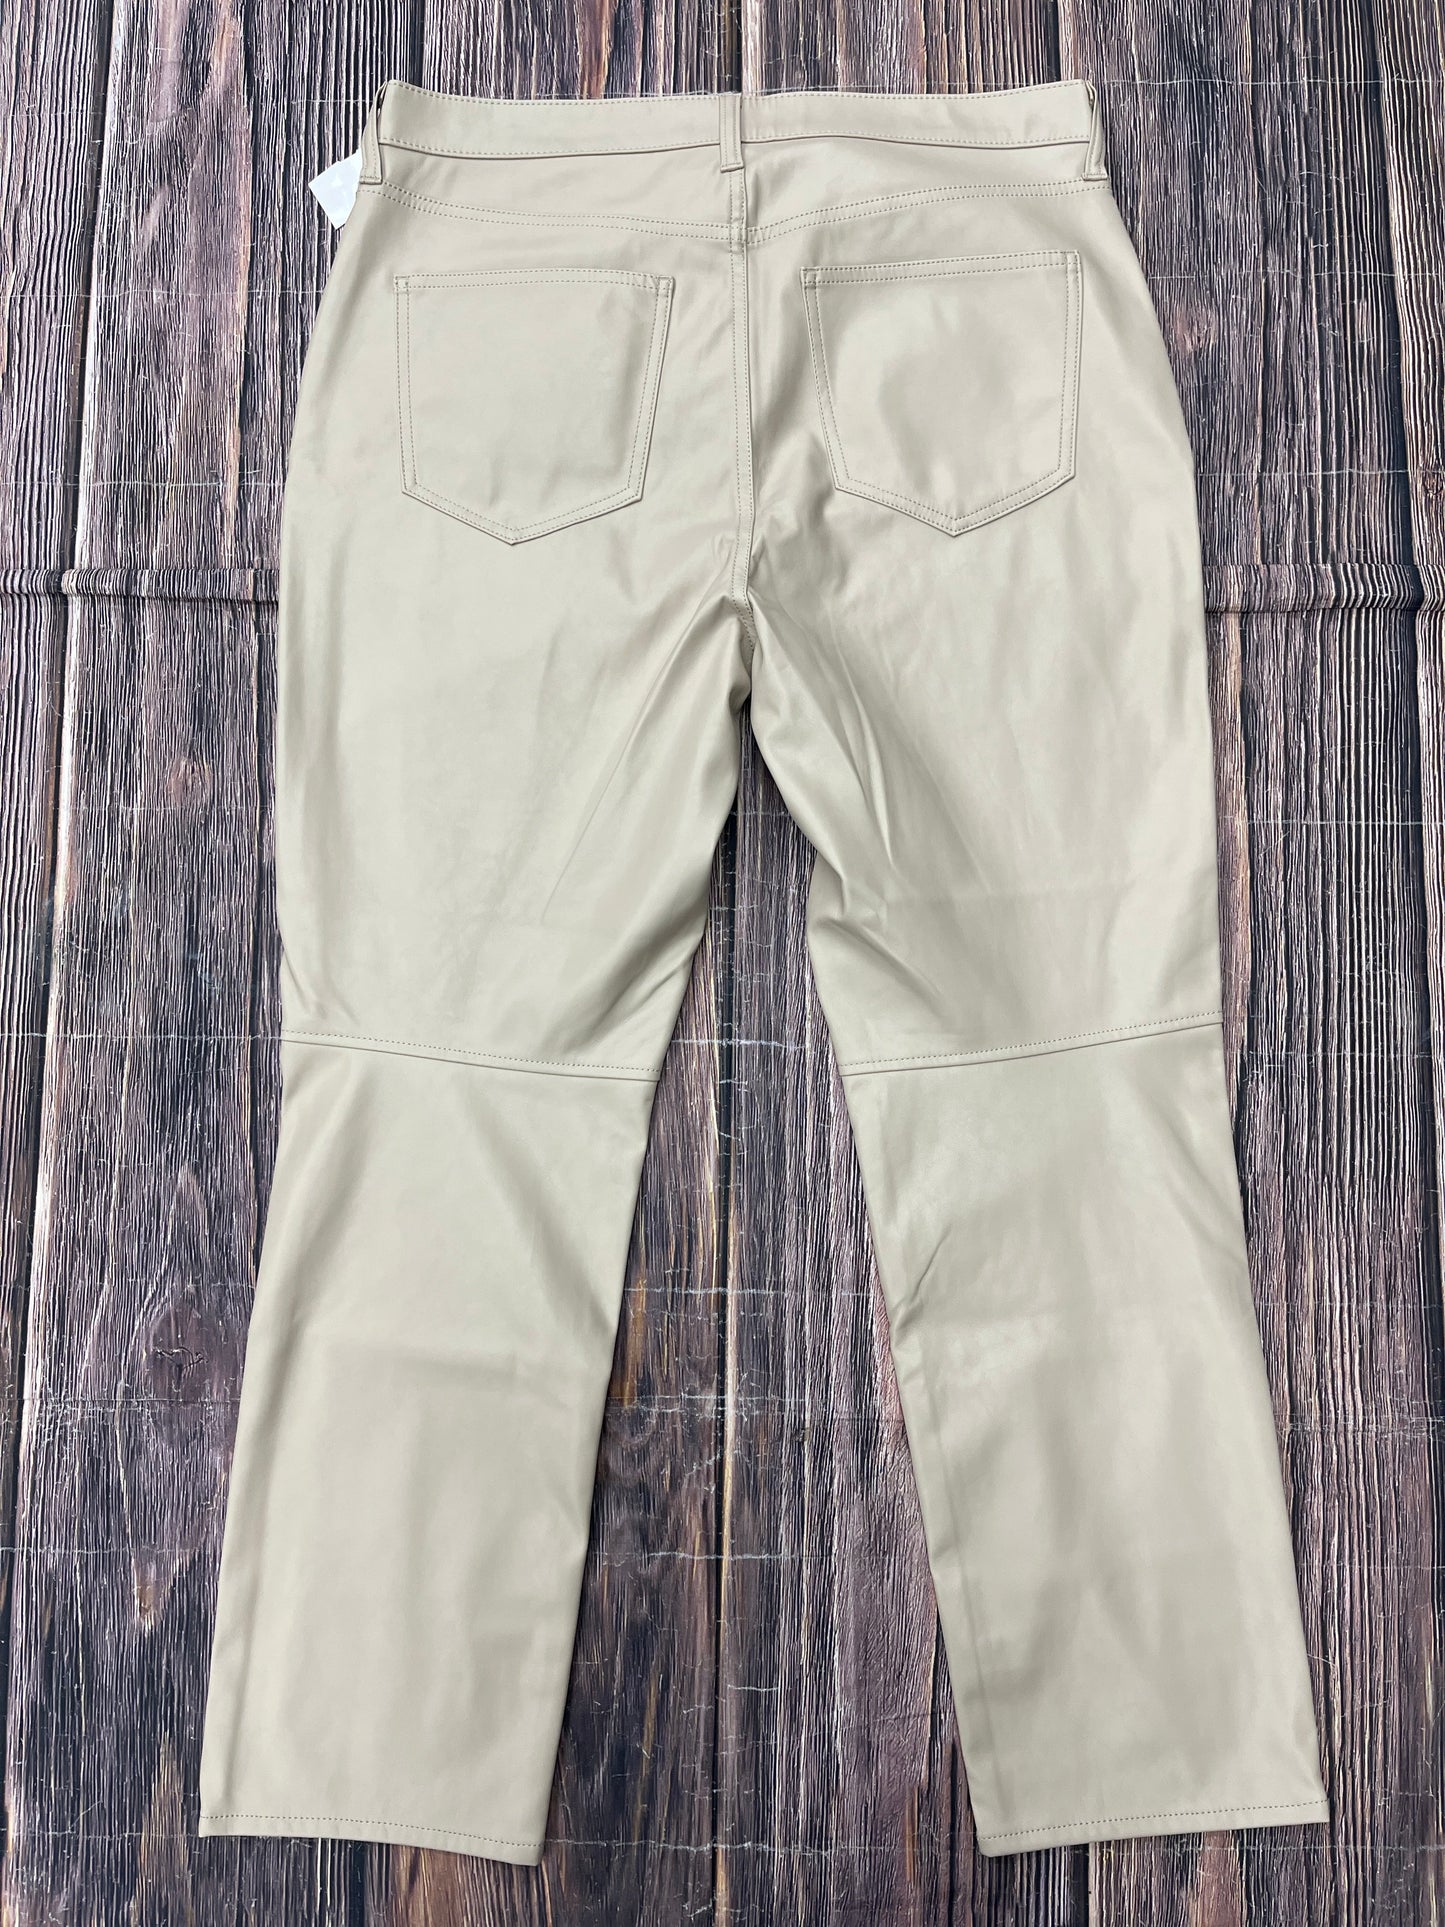 Pants Ankle By Gap  Size: 16